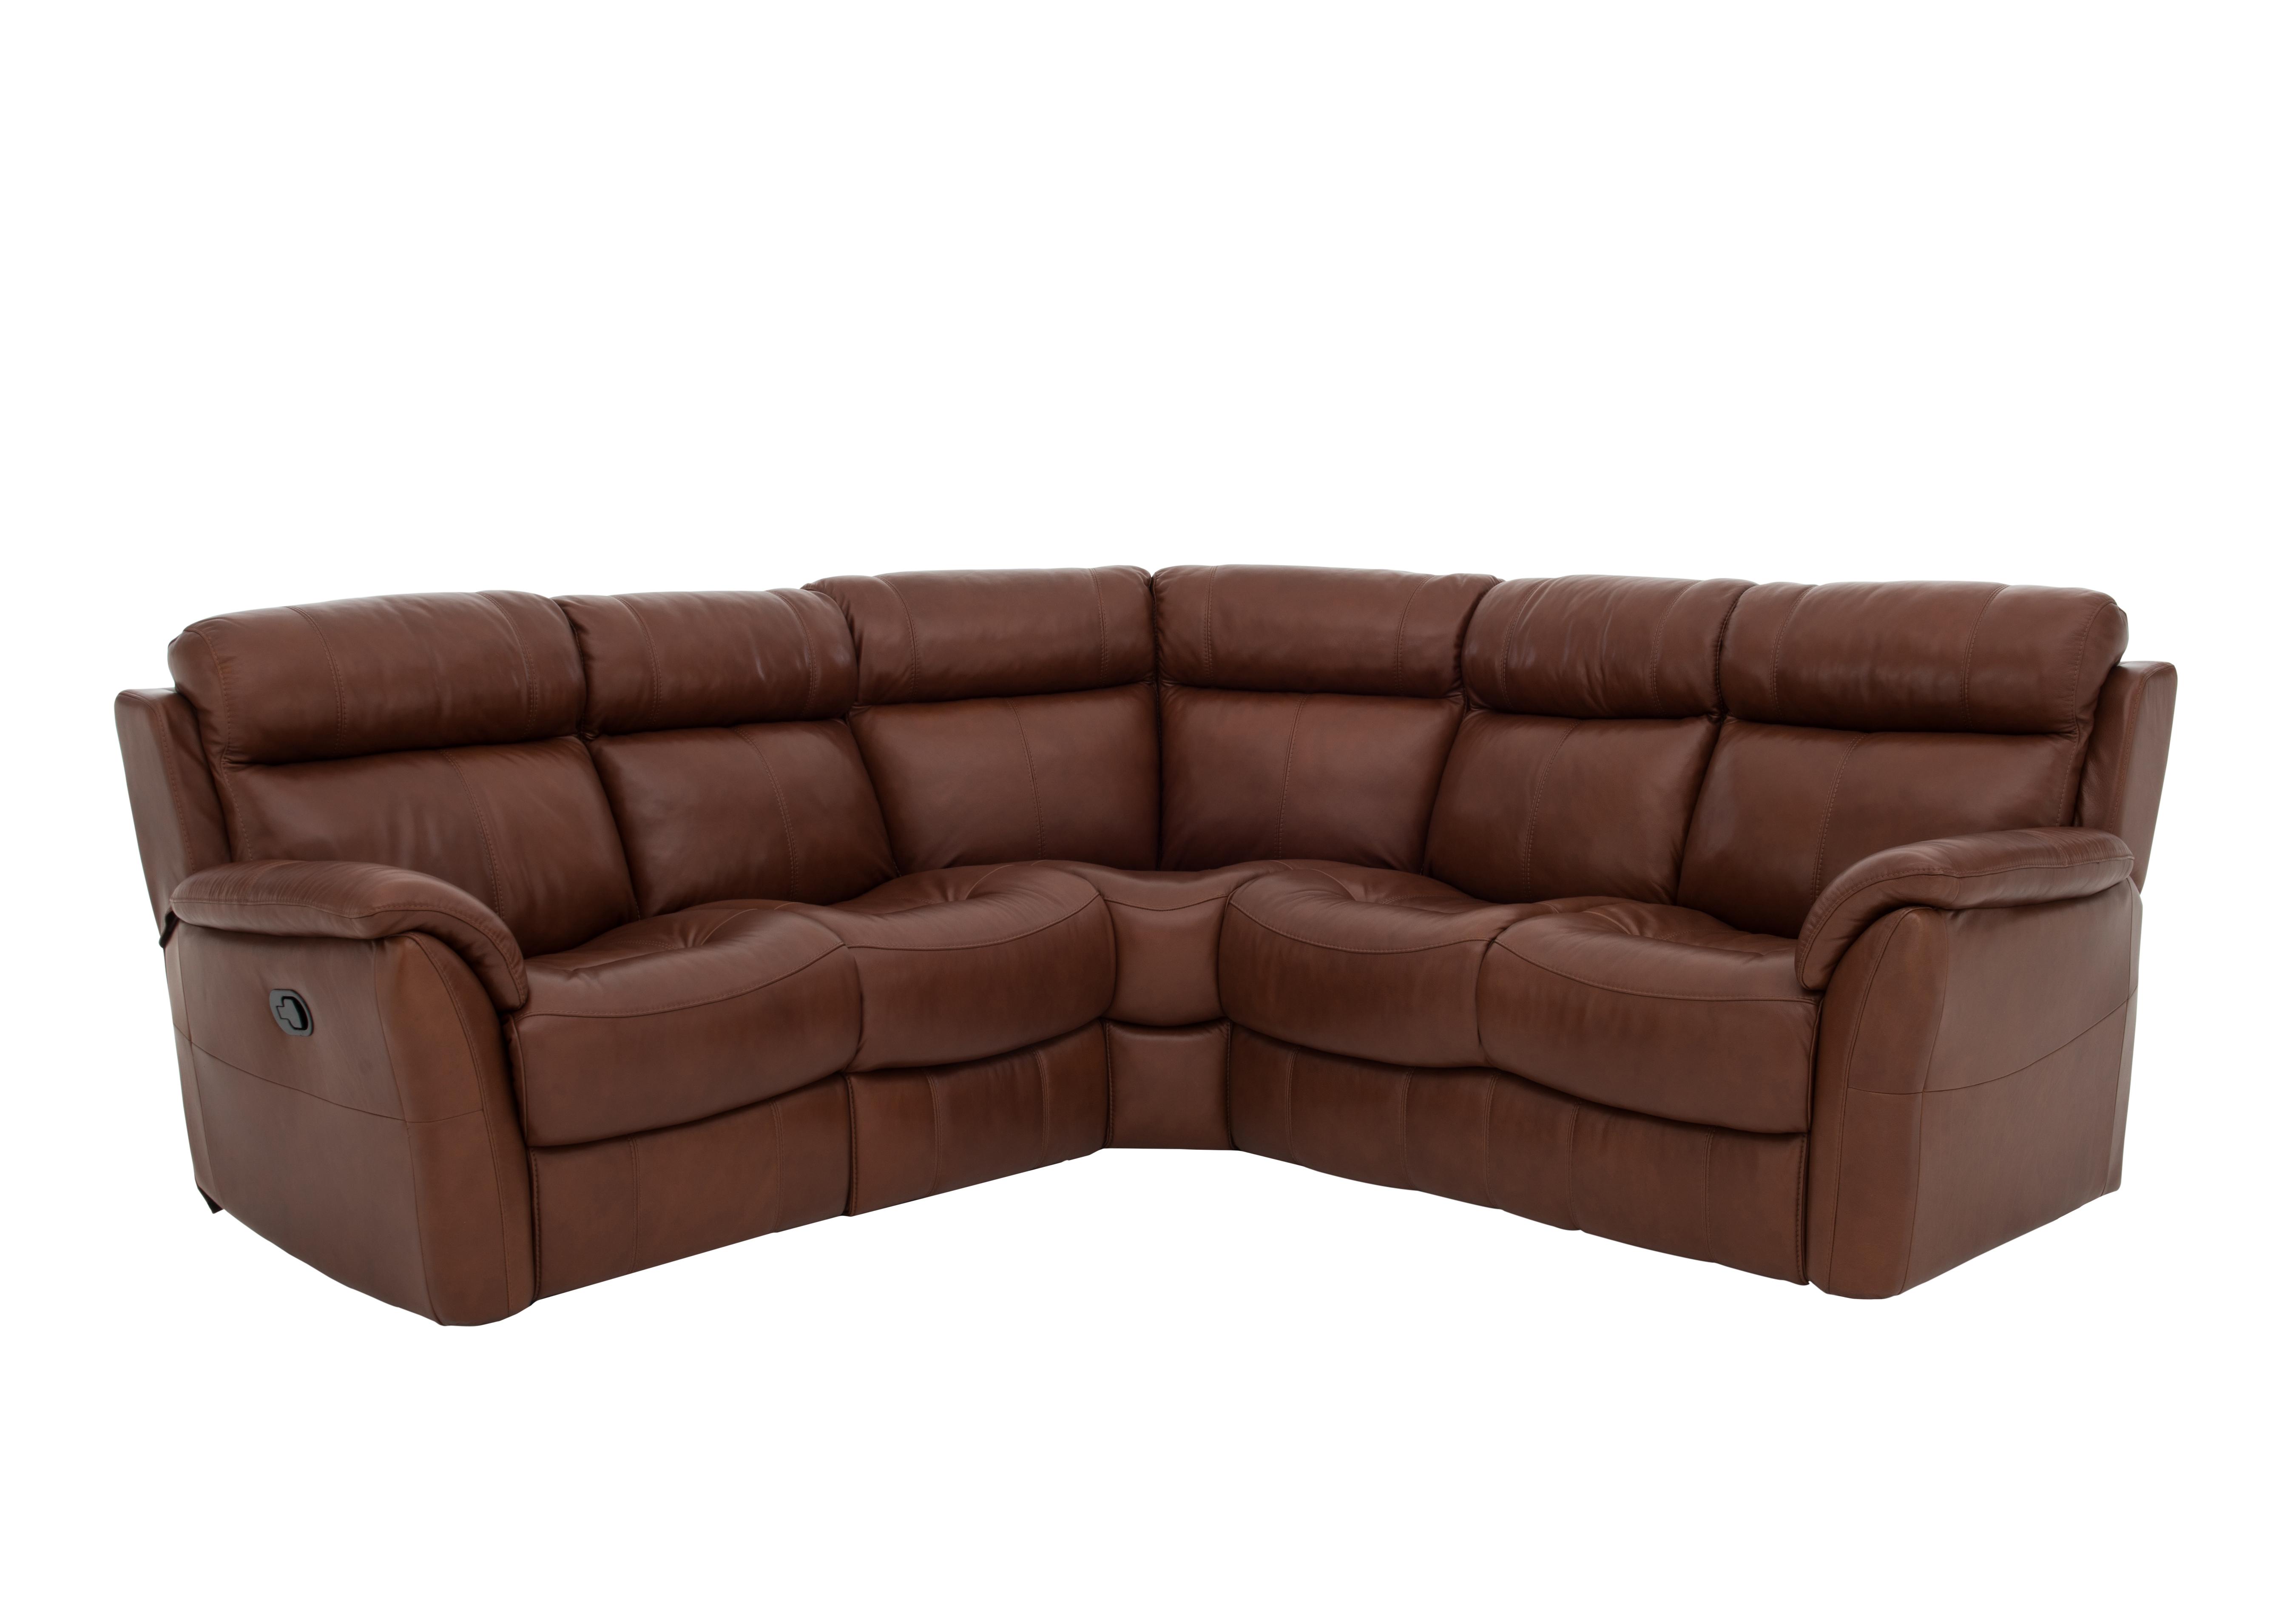 Relax Station Revive Leather Corner Sofa in Sk-297e Cumin on Furniture Village